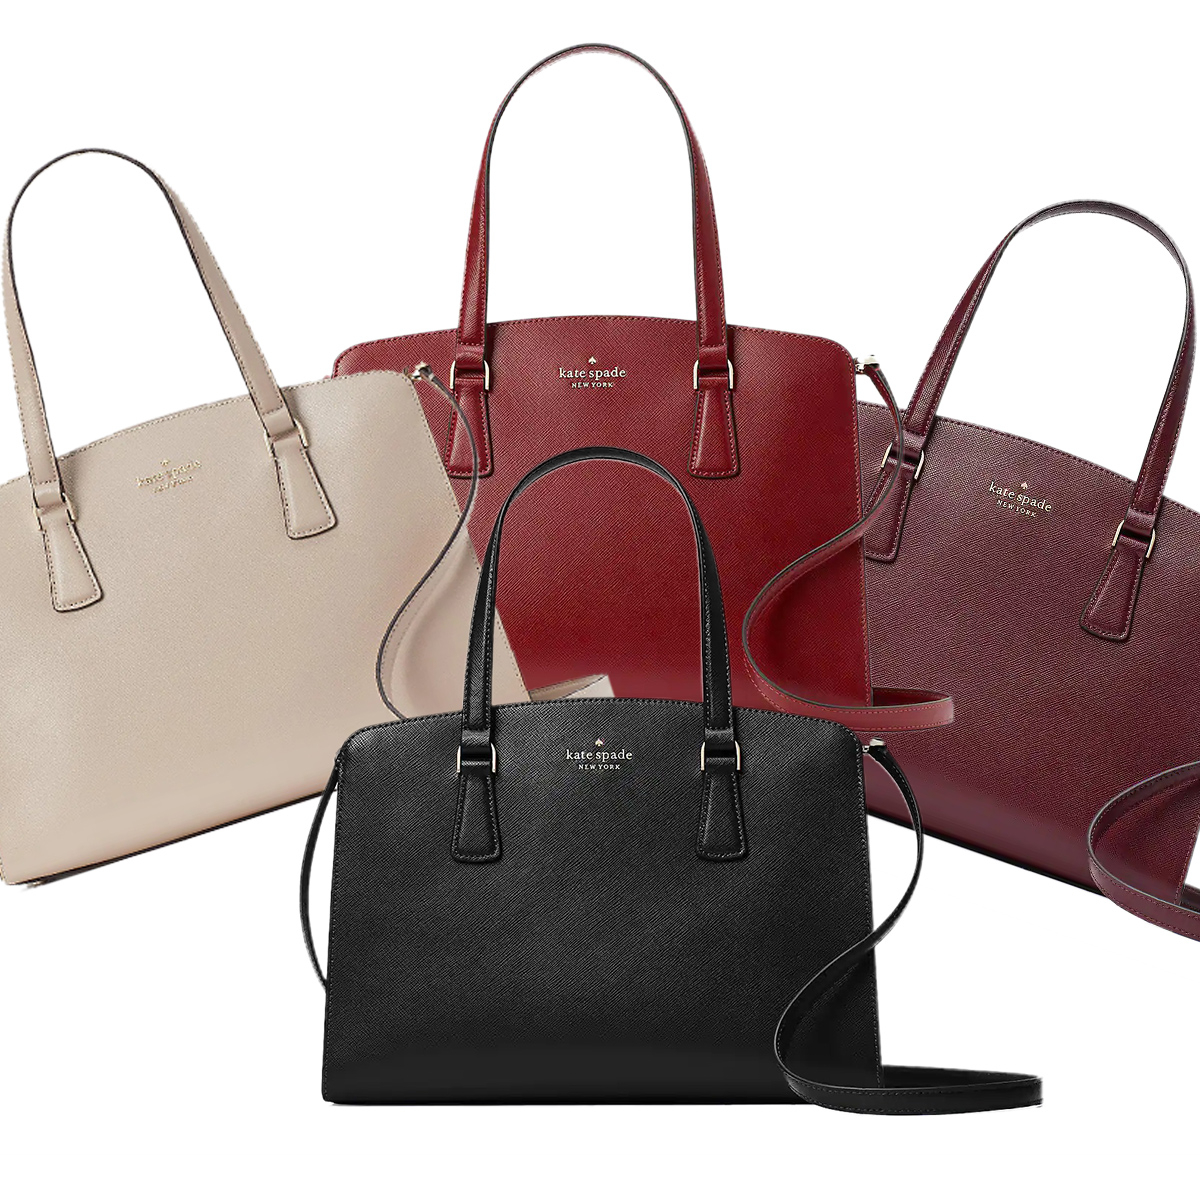 Kate Spade 24-Hour Flash Deal: Get This $400 Satchel Bag for Just $89